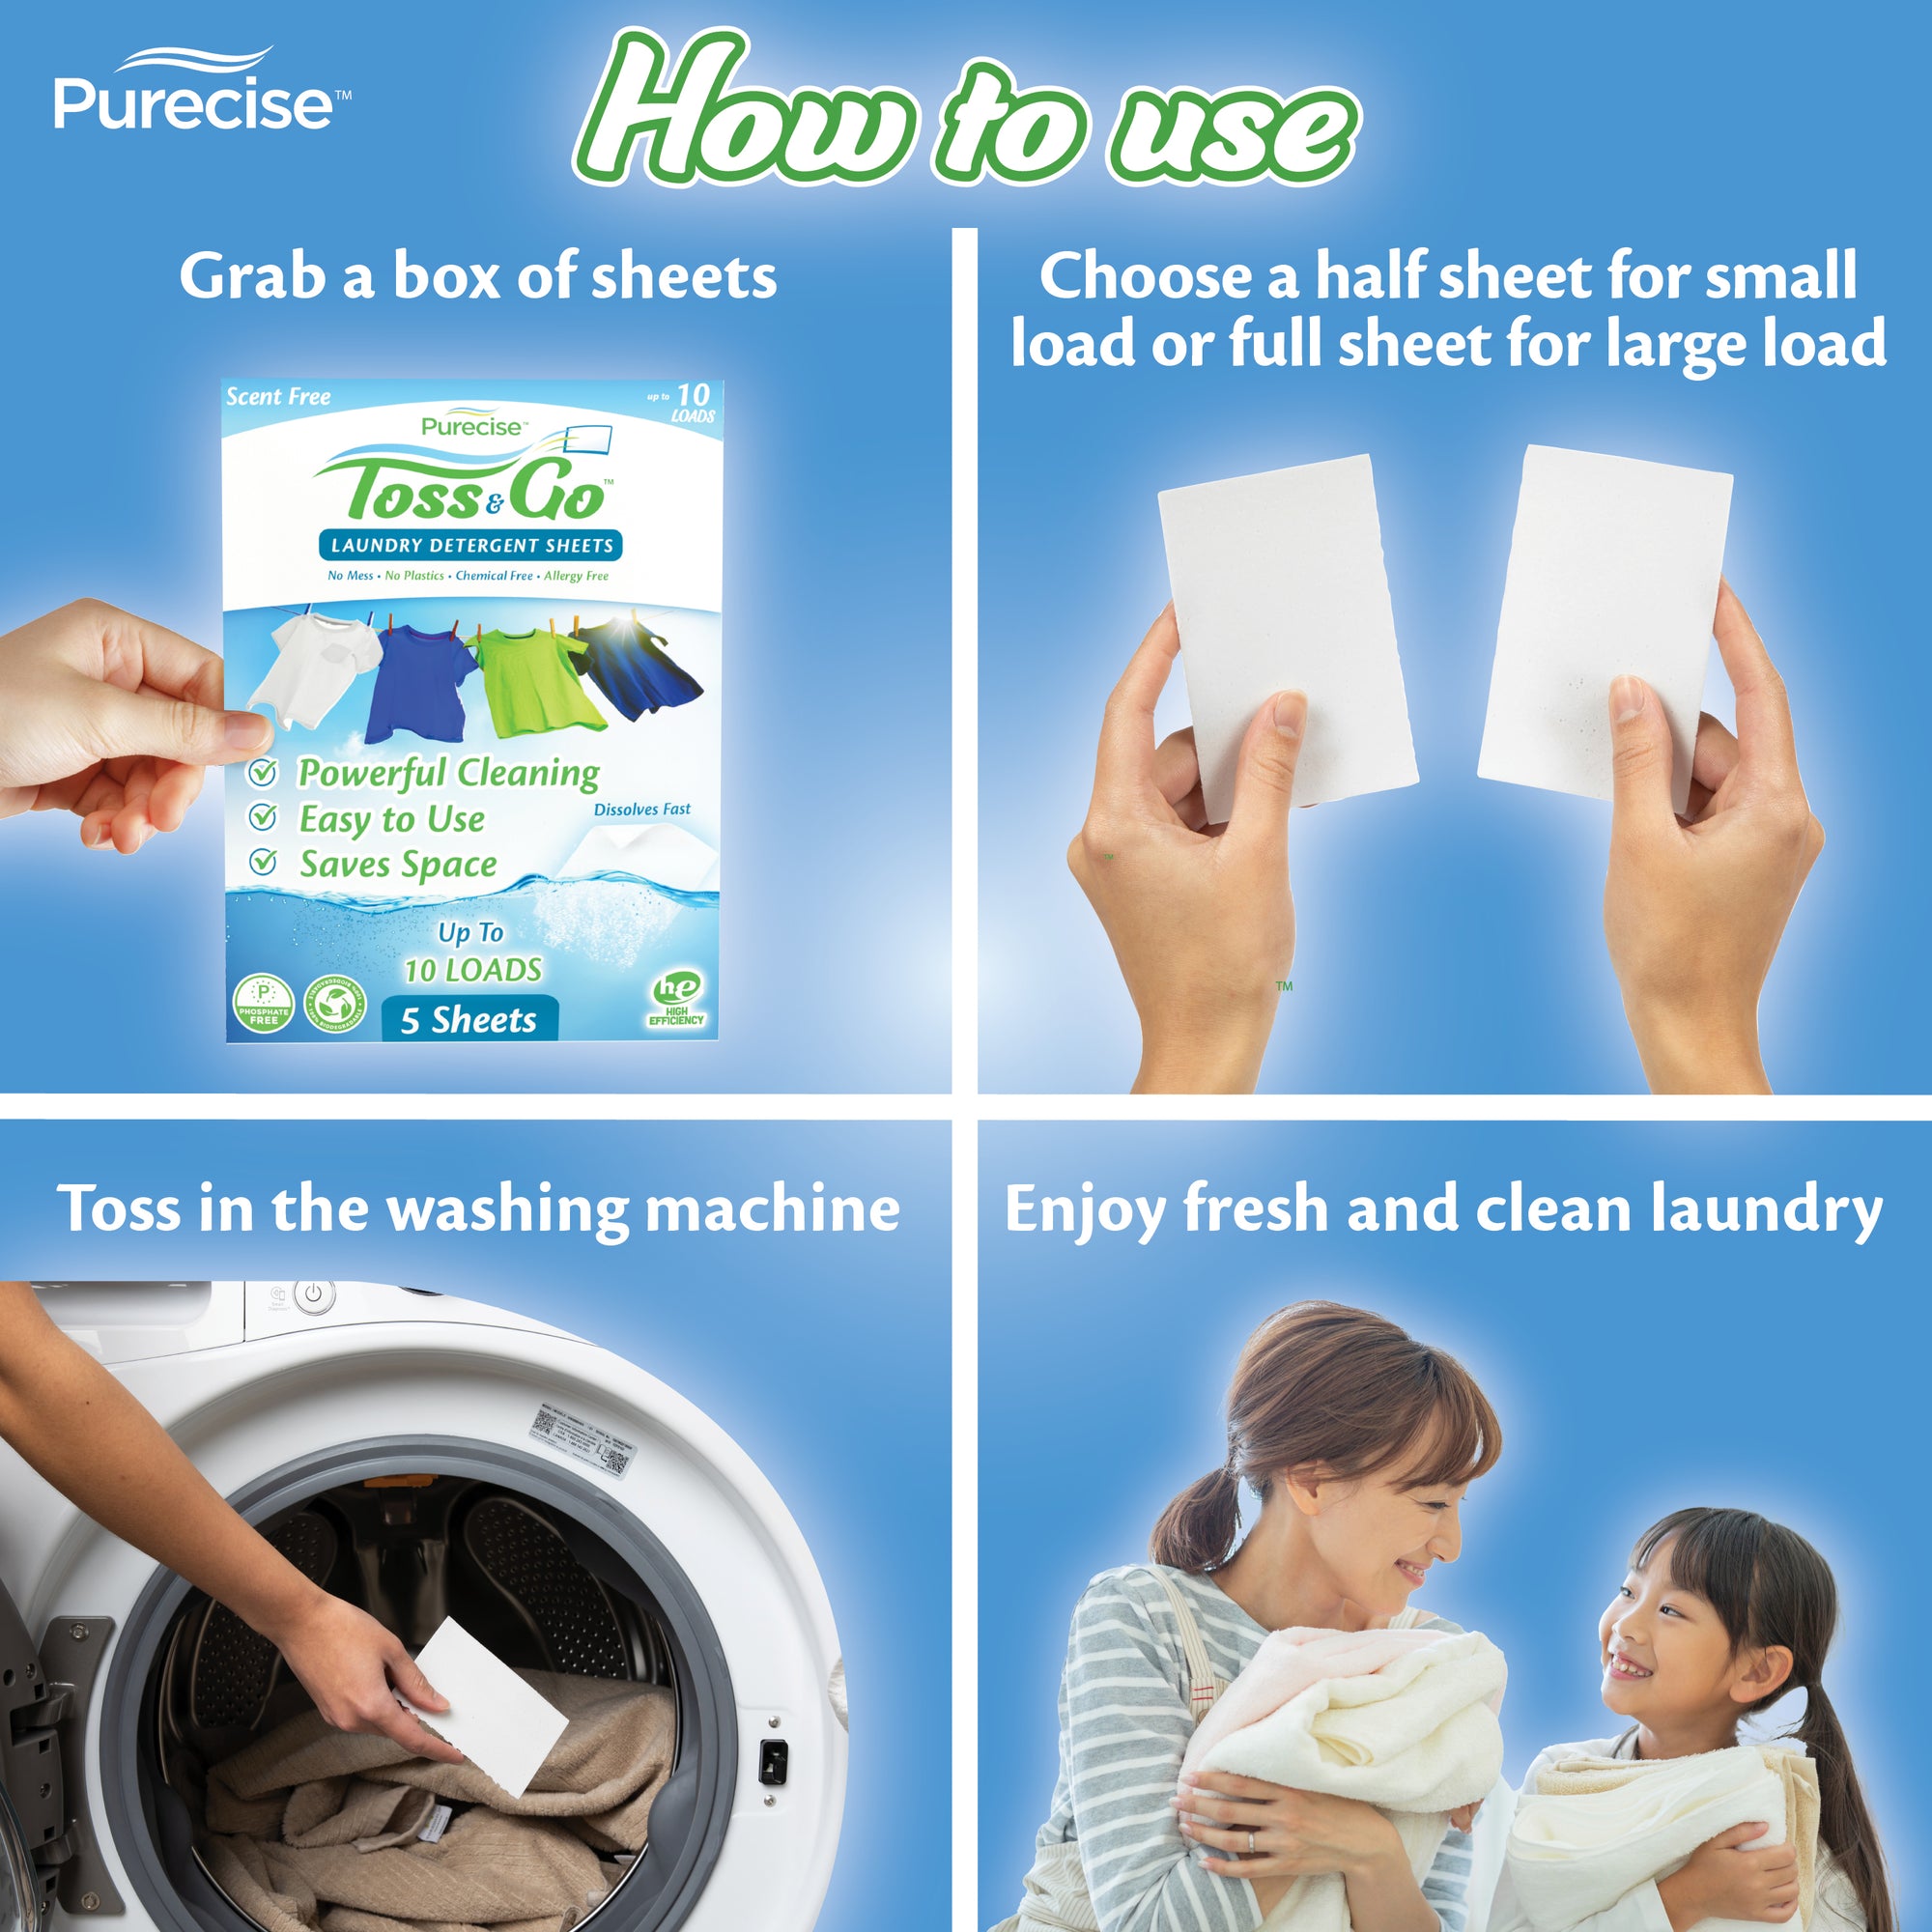 Toss & Go Laundry Detergent Sheets by Purecise How To